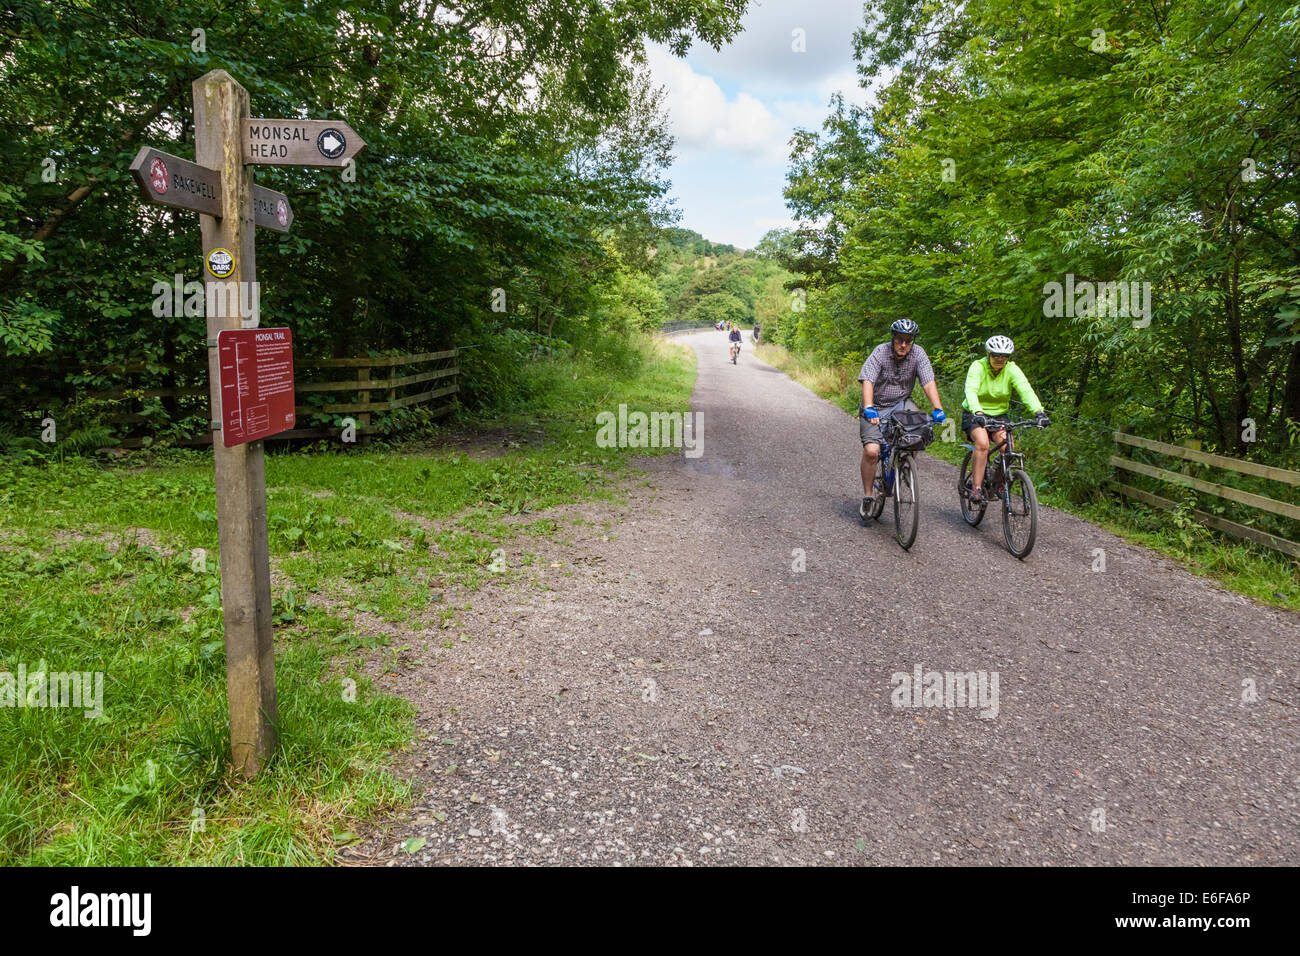 Cycling in the countryside. Cyclists on the Monsal Trail in Derbyshire, Peak District National Park, England, UK Stock Photo